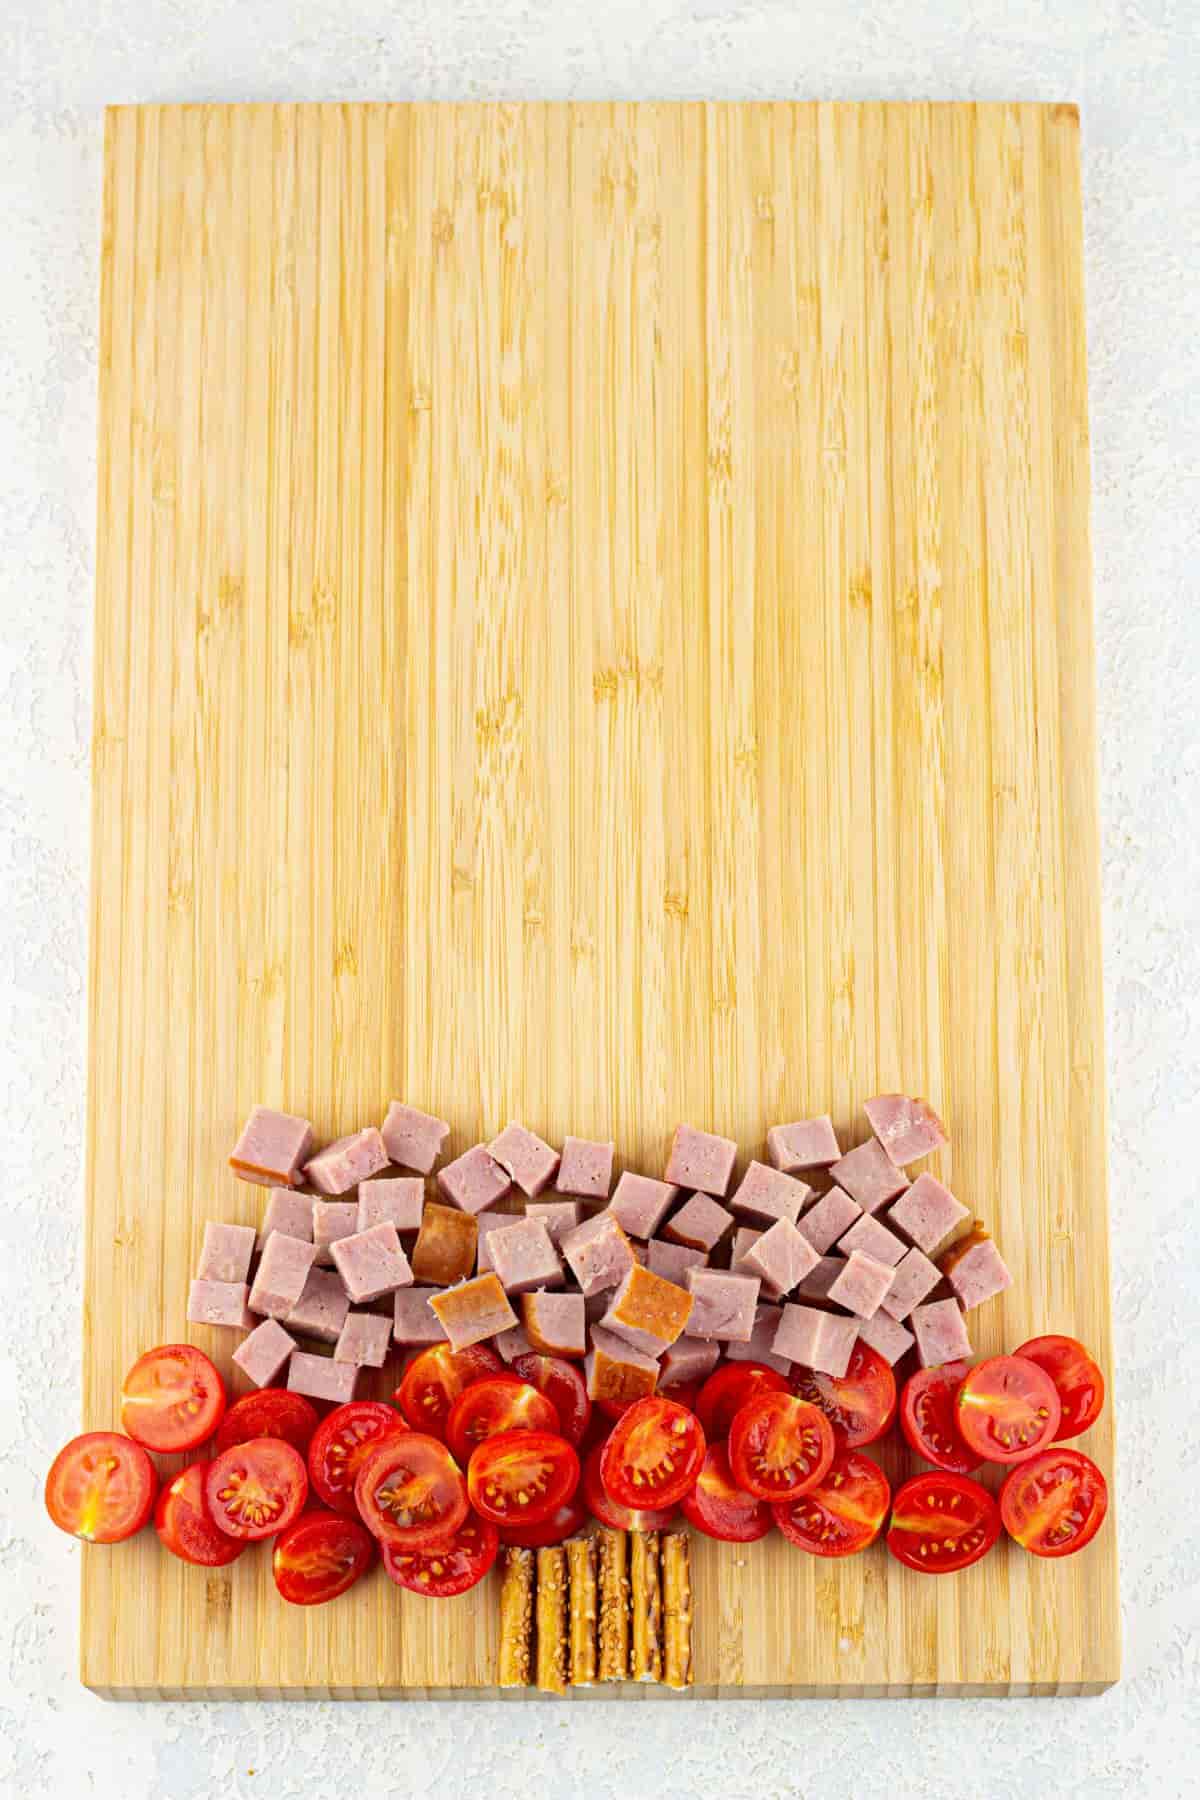 A cutting board with pretzel sesame sticks arranged as the trunk of a Christmas tree, diced beef ham, and sliced tomatoes on it.